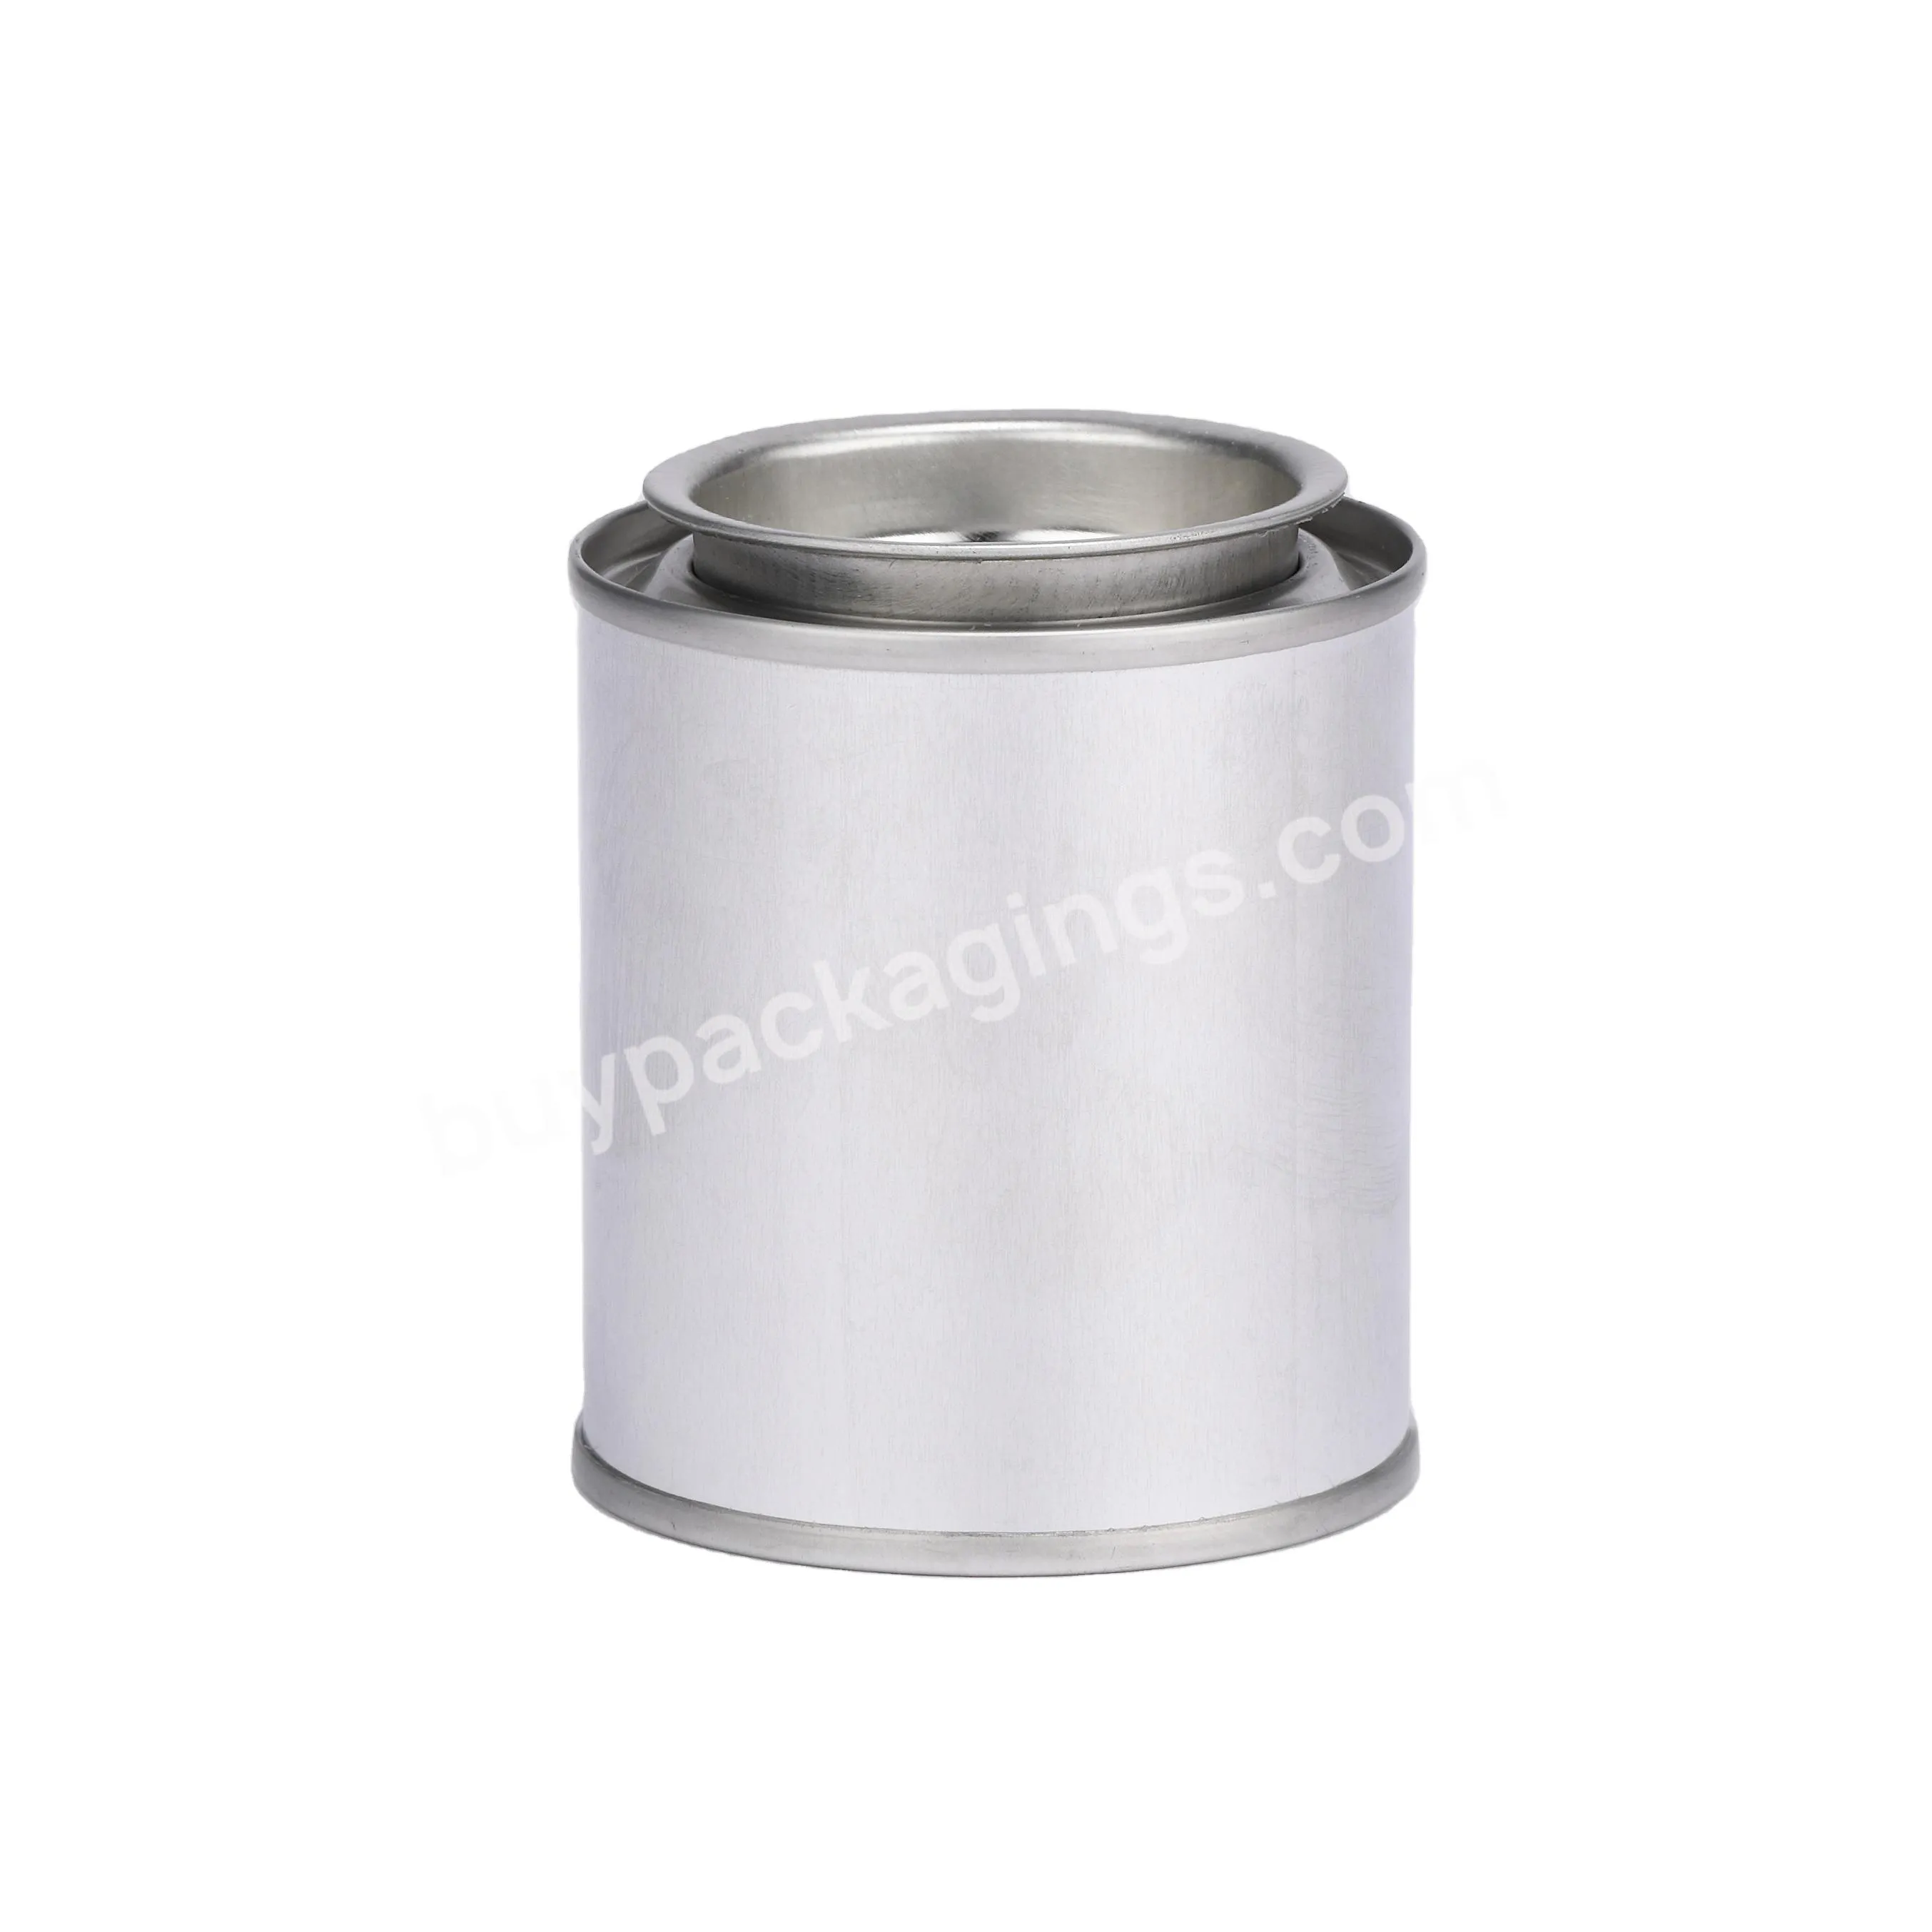 100ml Round Paint Tin Cans For Candles Packing - Buy Tin Can For Candles,Paint Tins Candle,Round Candle Tin.